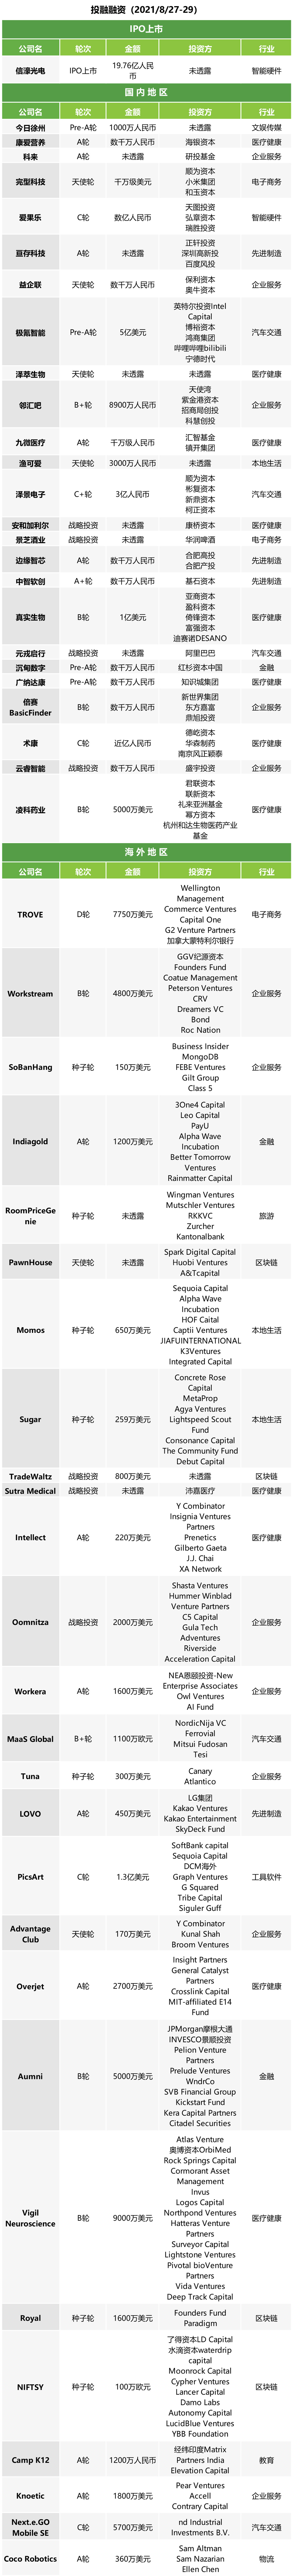 E-Commerce Platform Investment and Financing News | Jikrypton Smart has won a round of investment of 500 million dollars in Pre-A; Zejing Electronics completed financing of more than 300 million yuan for C+; Real biological round B financing of 100 million US dollars